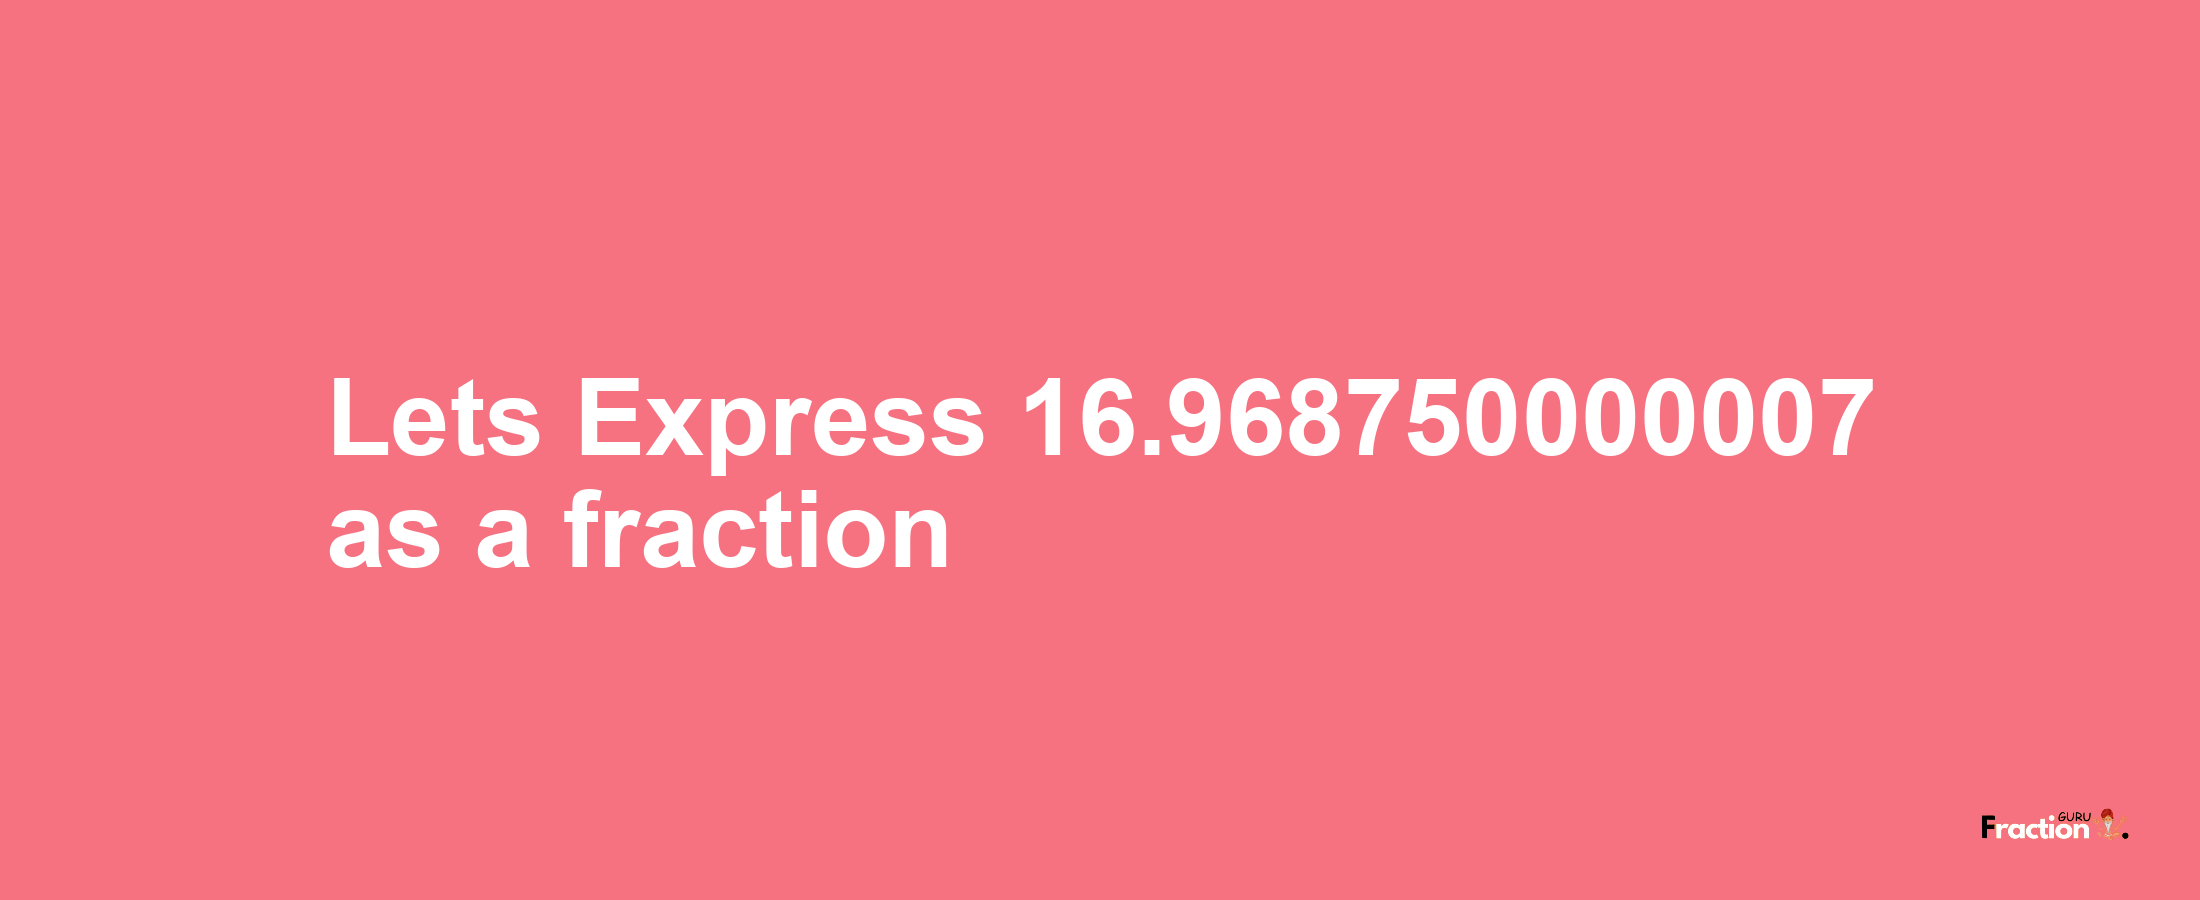 Lets Express 16.968750000007 as afraction